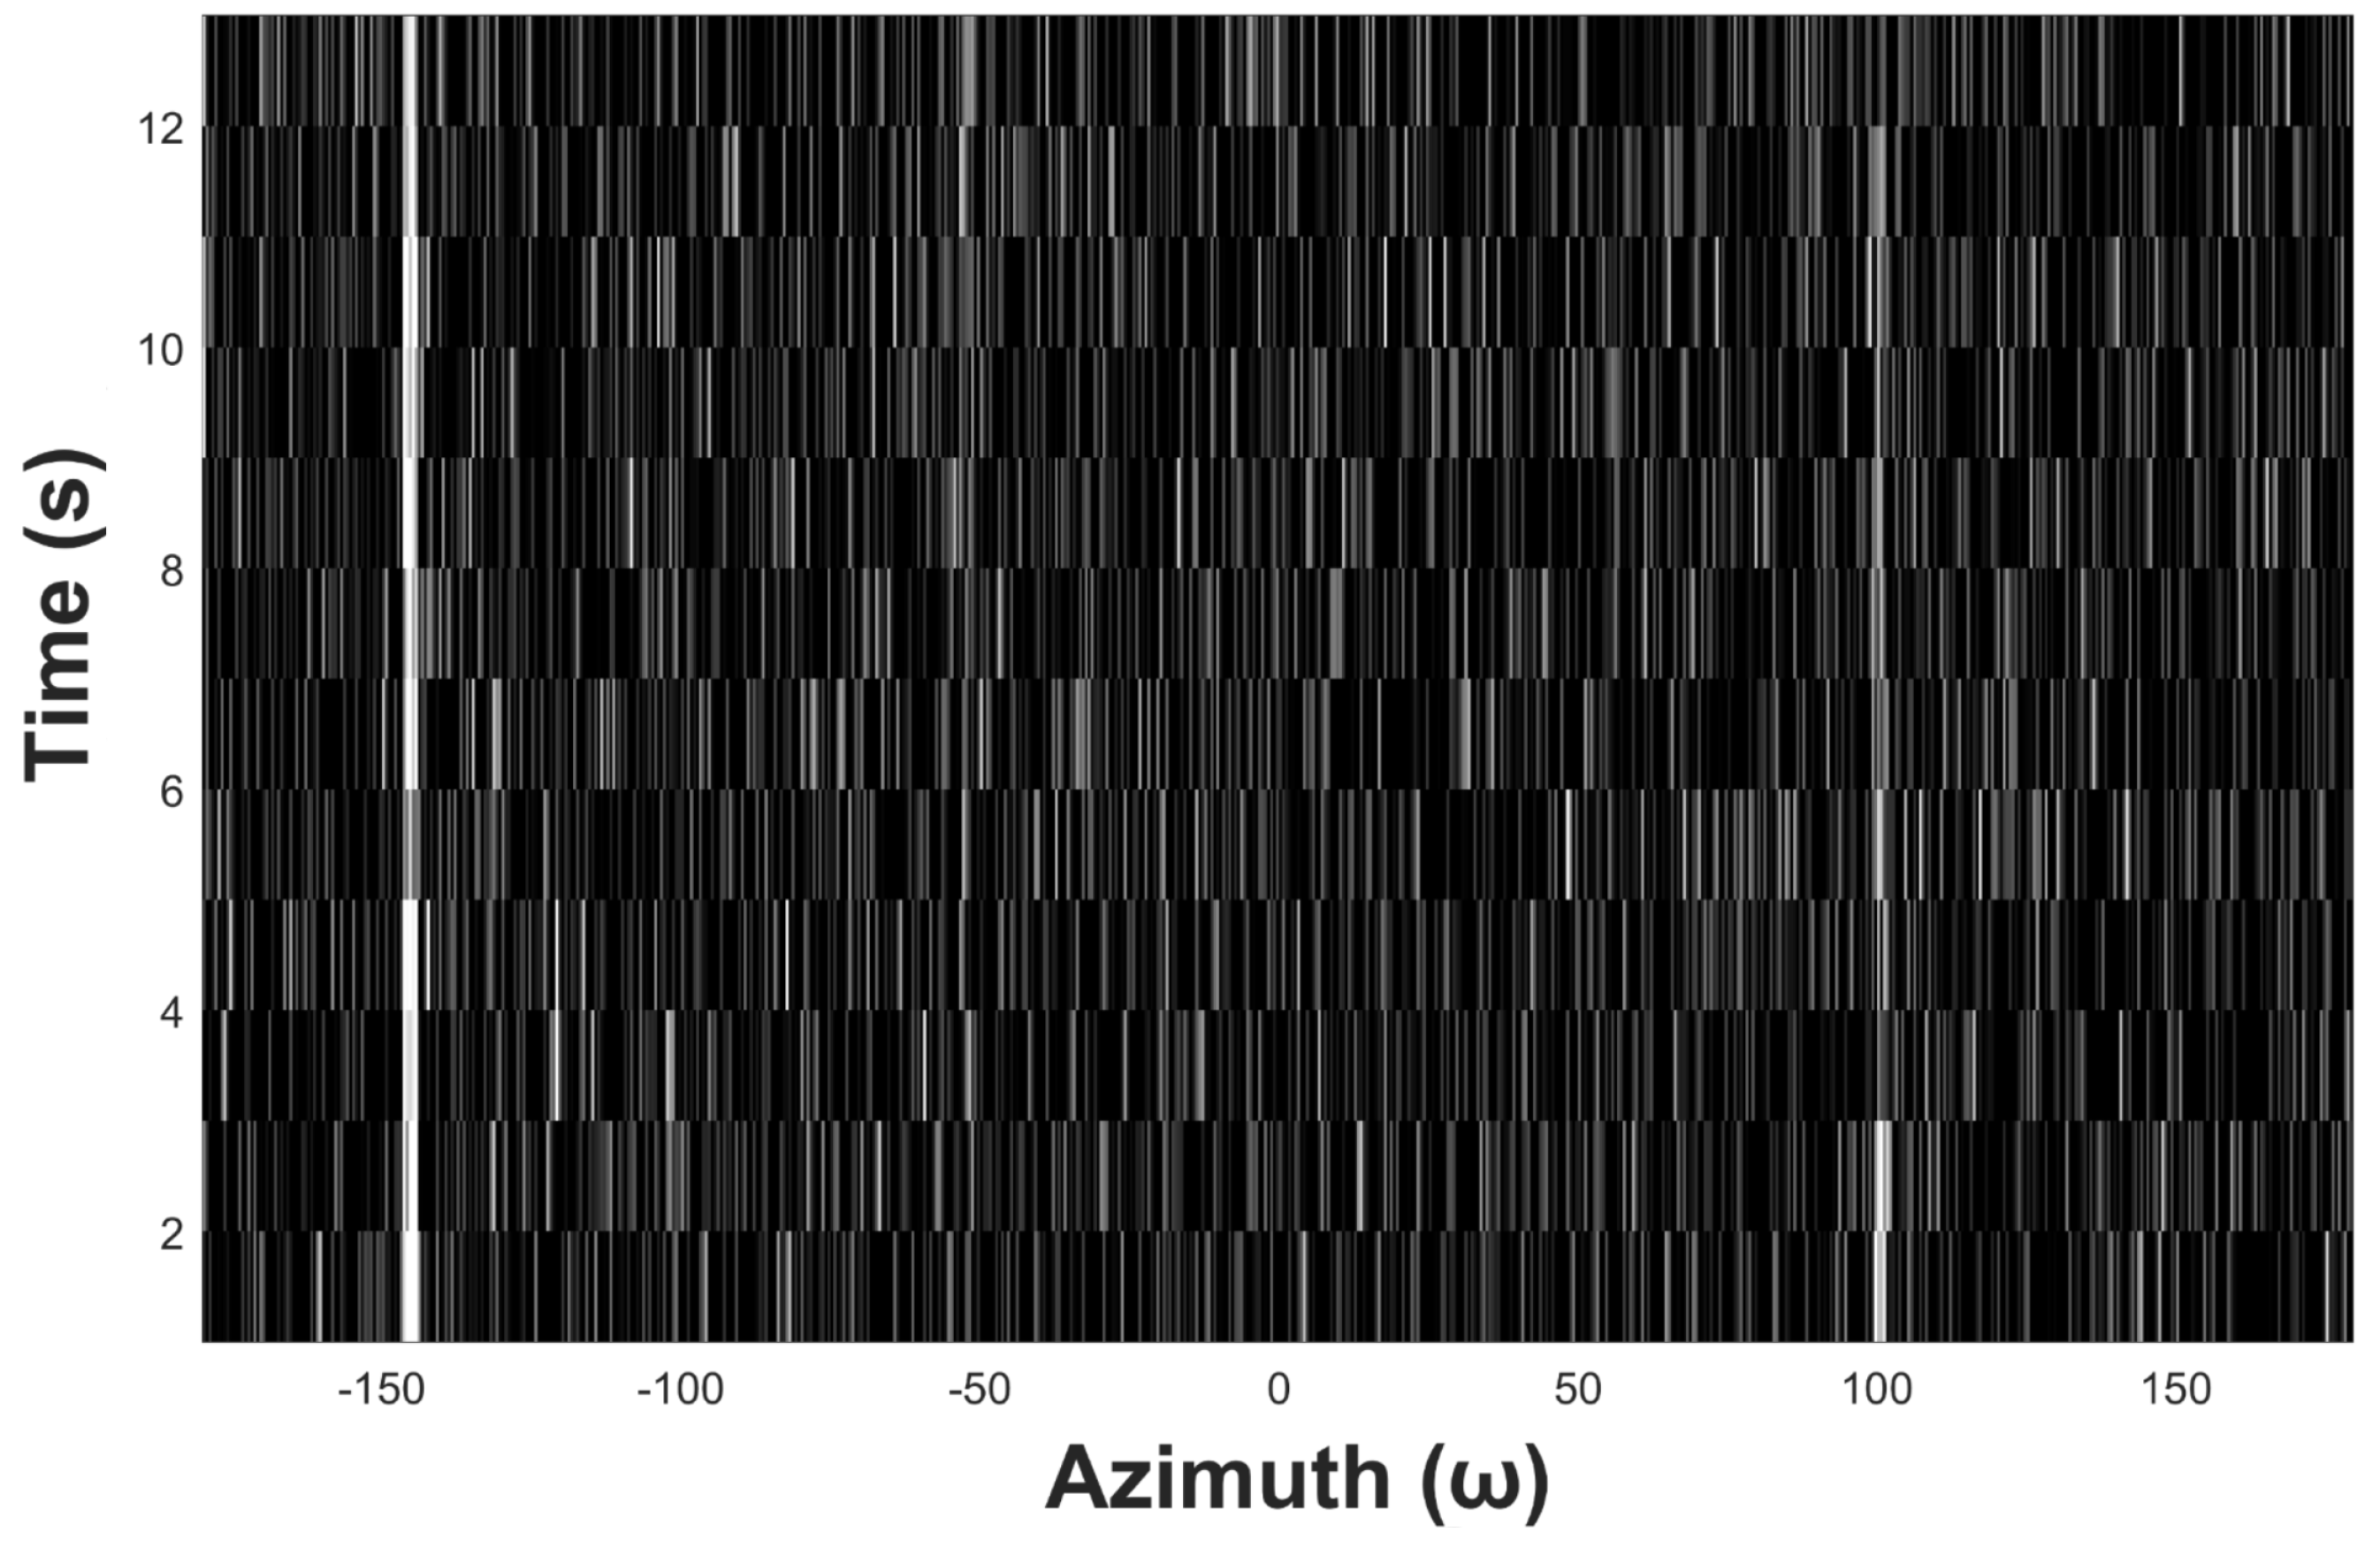 Sensors | Free Full-Text | Automatic Acoustic Target Detecting and Tracking  on the Azimuth Recording Diagram with Image Processing Methods | HTML